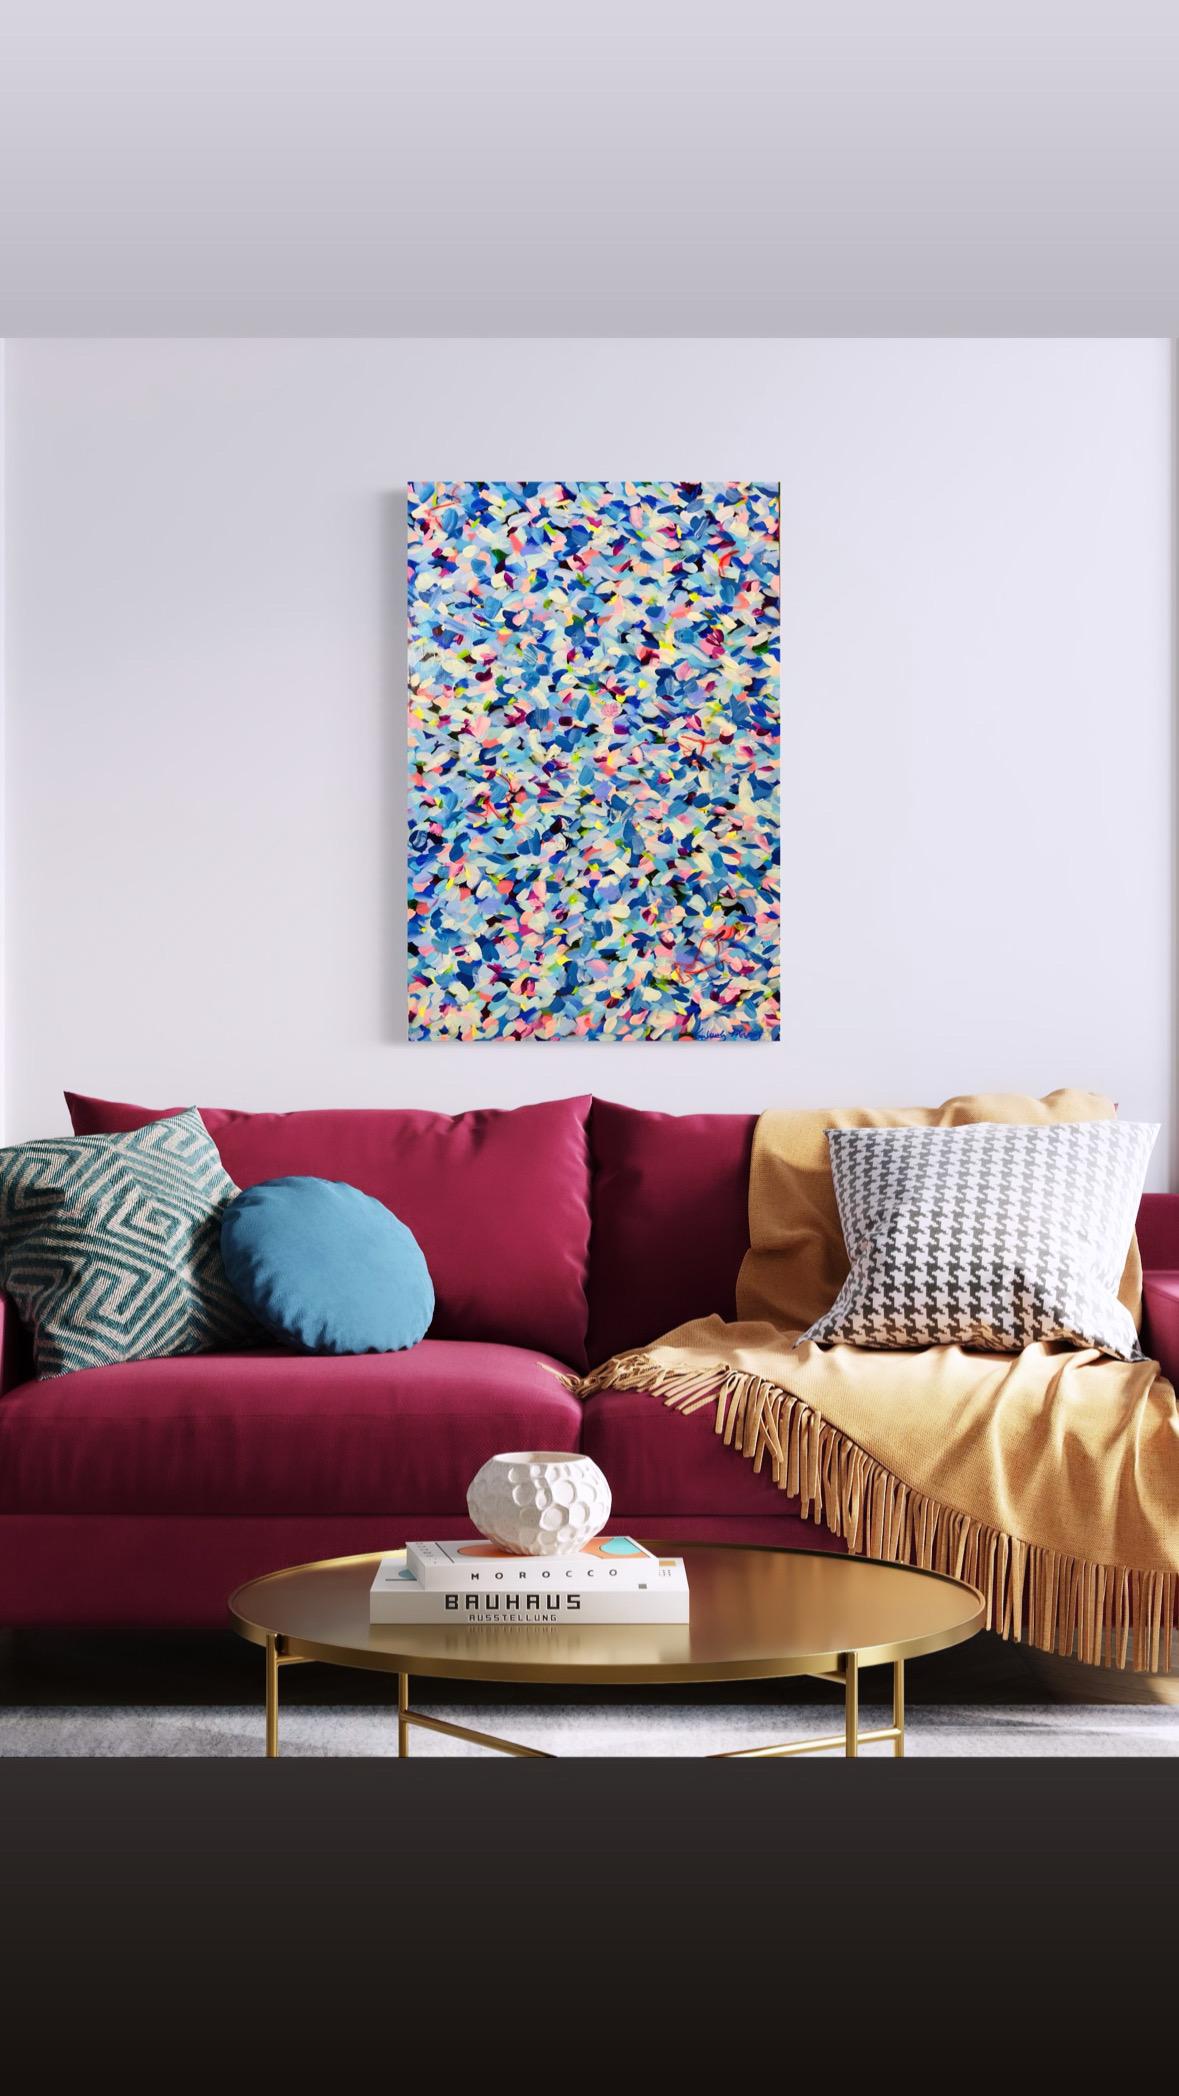 Glimmers (Blue, Pink, Yellow, White, Abstract, Pointillism, Floral) - Painting by Kimberly Marney